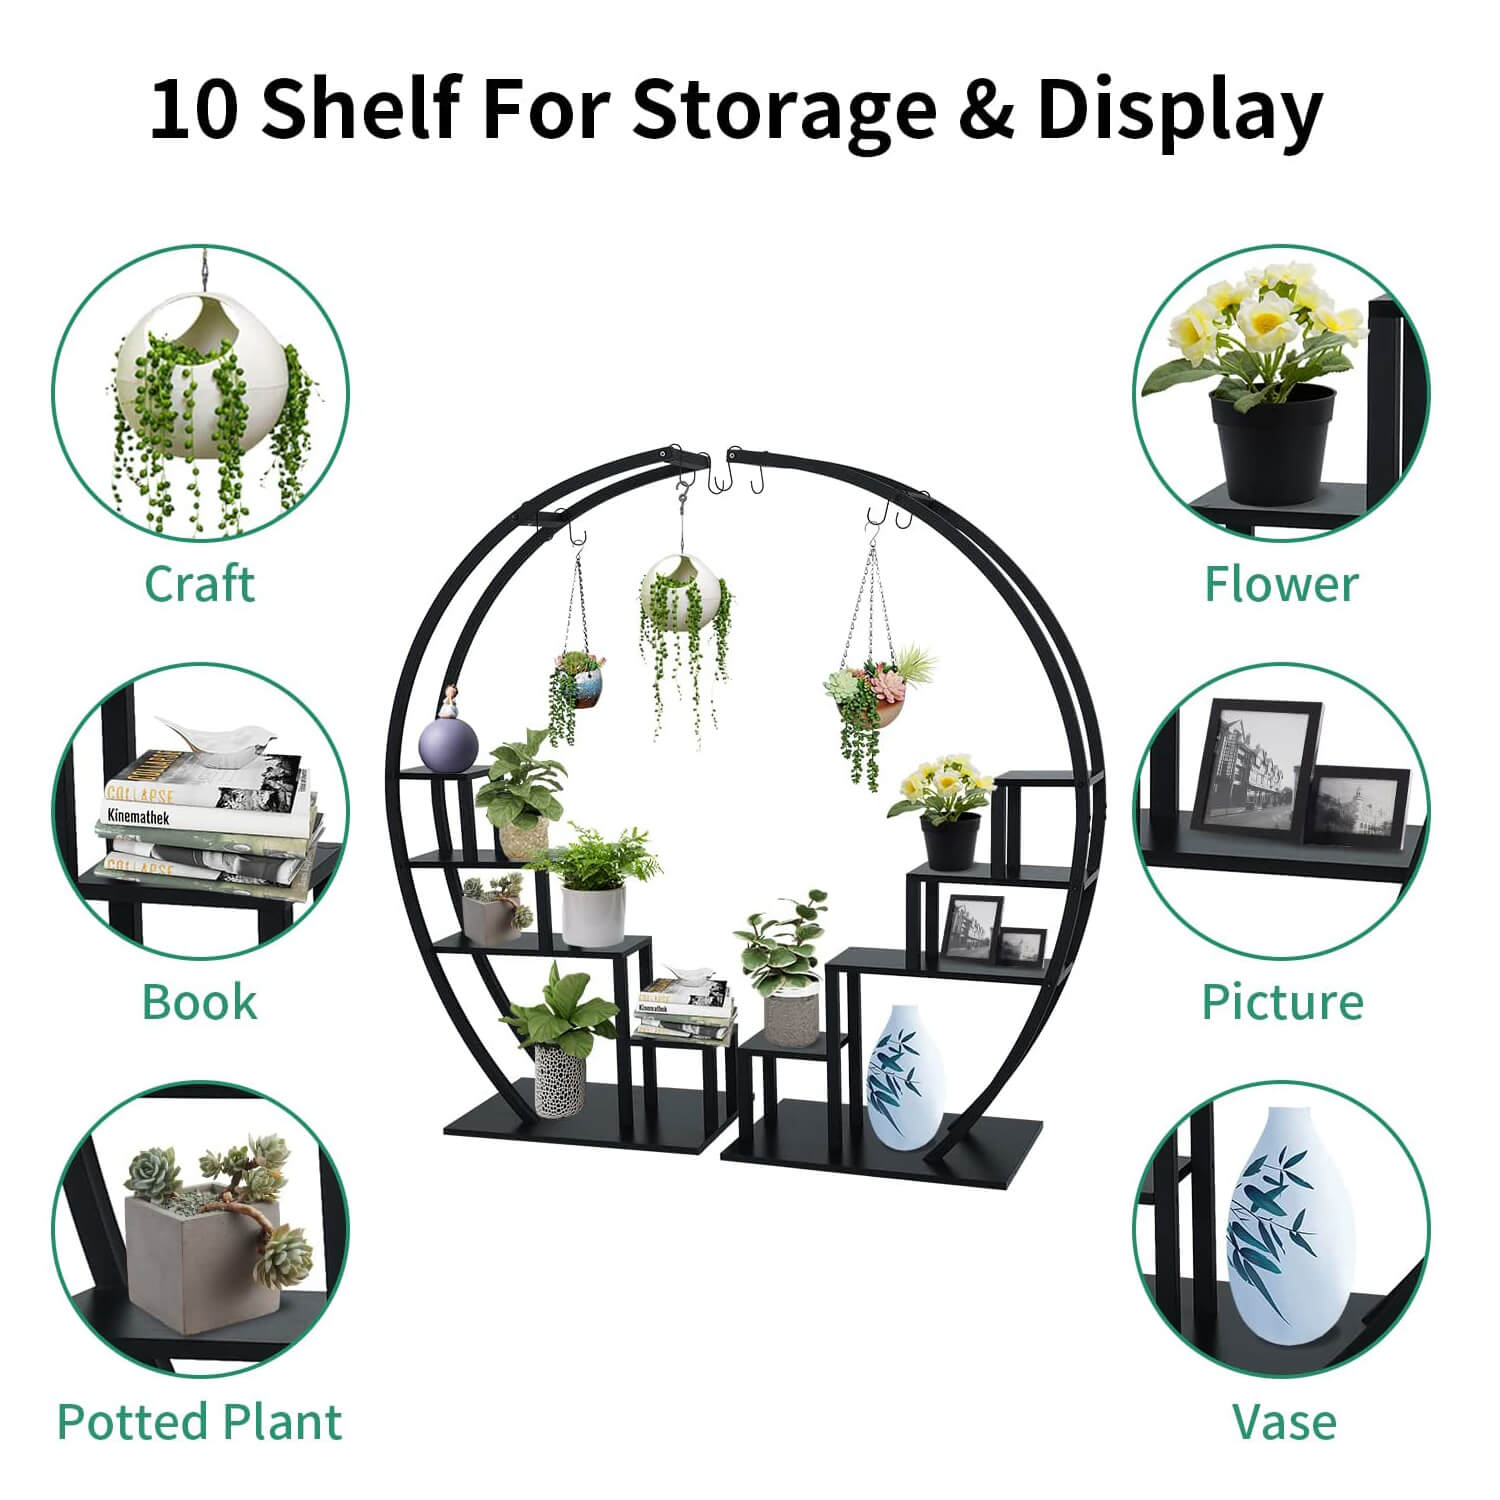 10 shelf for storage and display of Black Plant Stand Indoor, 5 Tier Half Circle Ladder Flower Pot Stand GD003